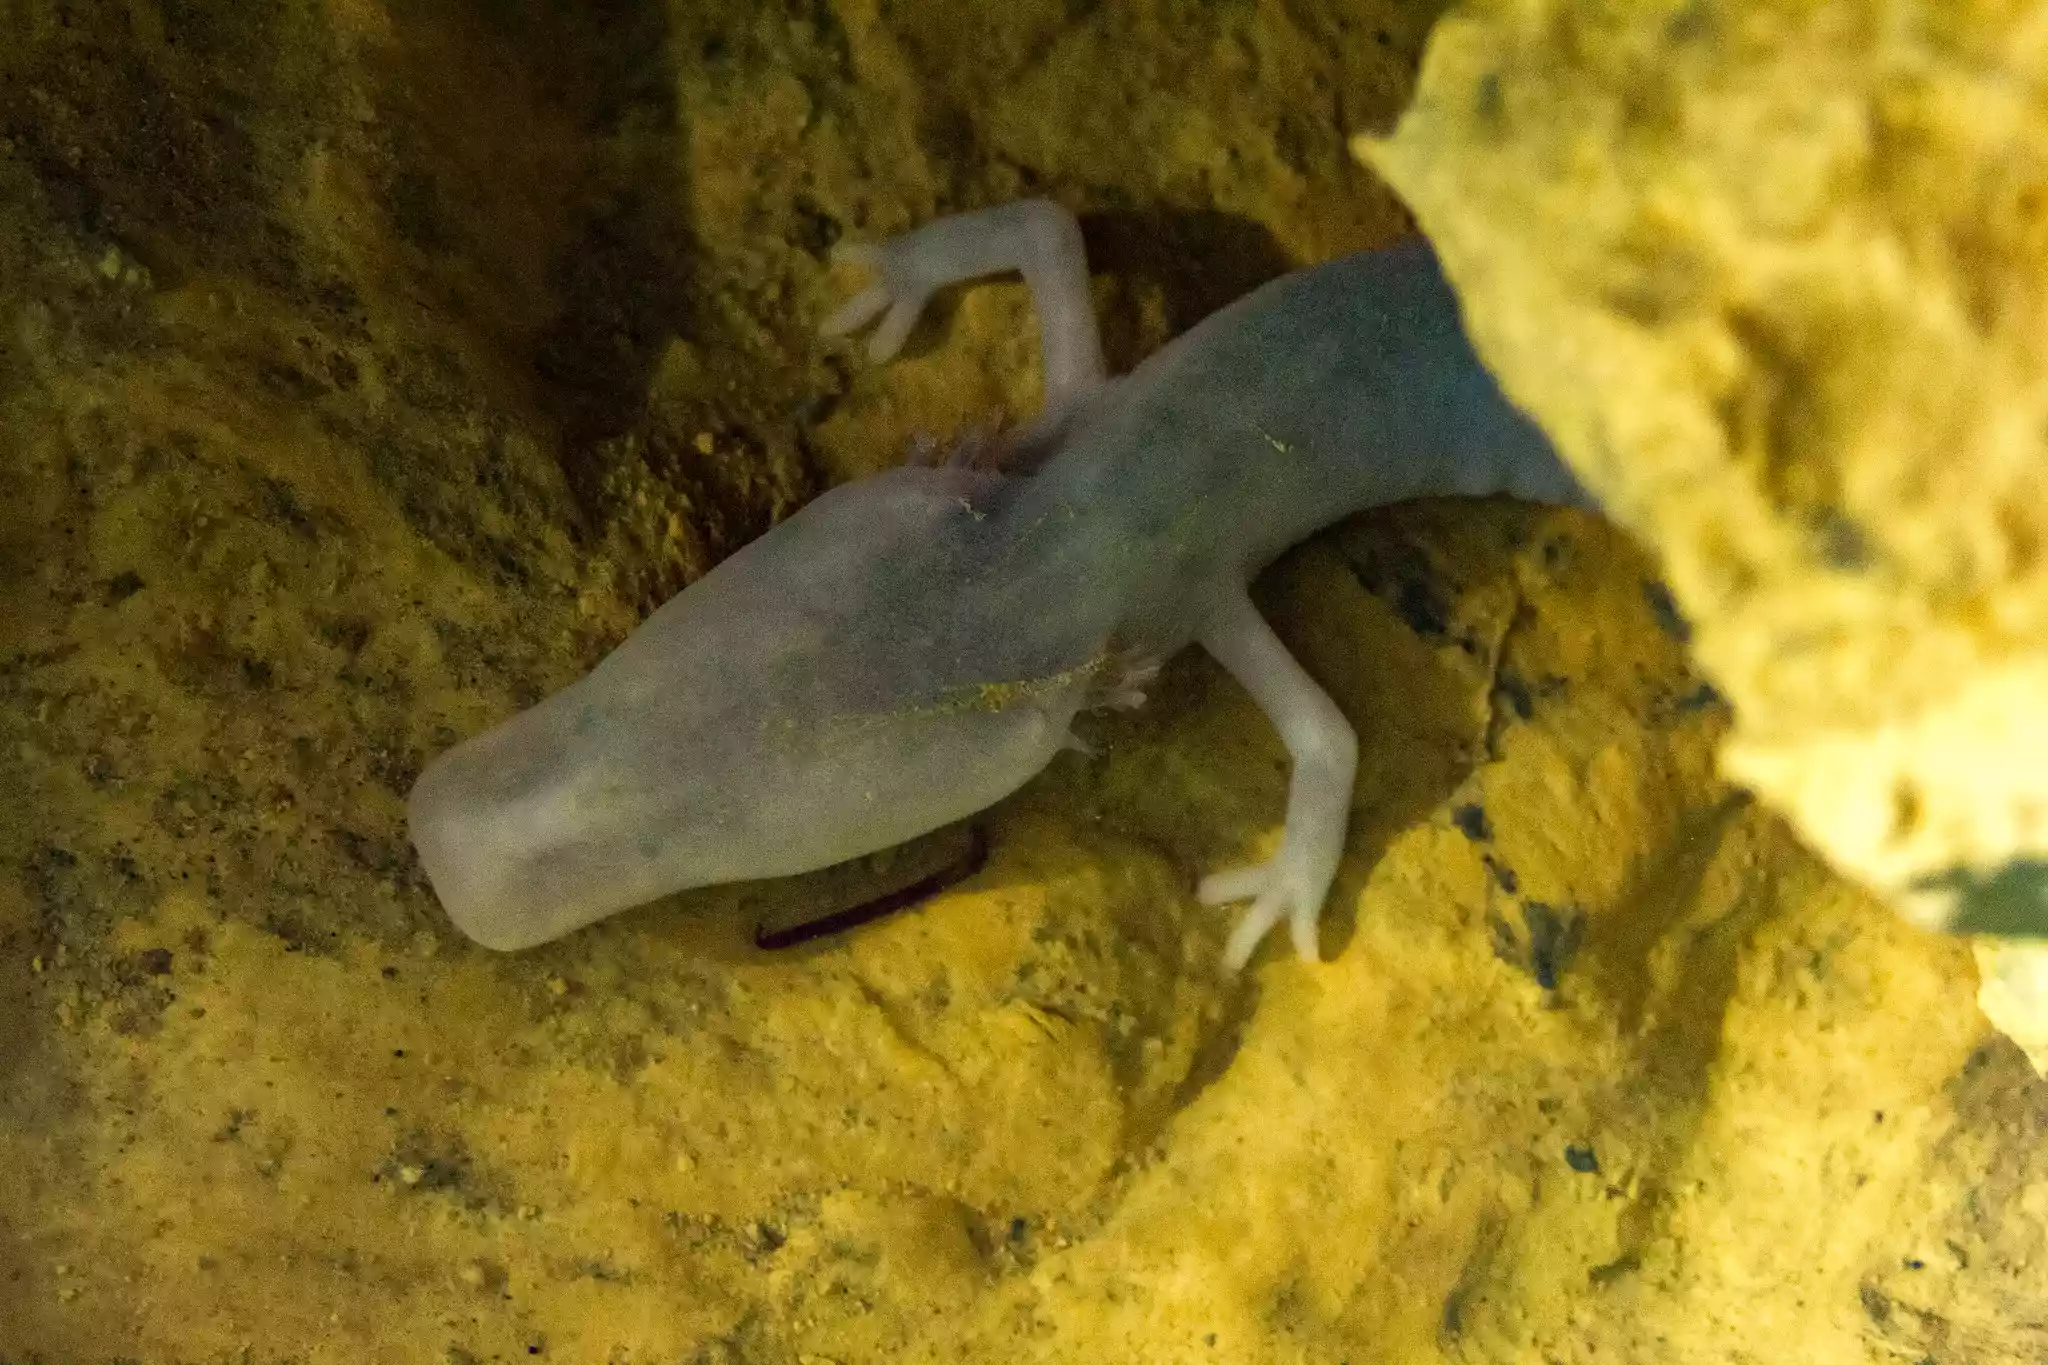 Olm (Proteus anguinus) a gecko like animal that is a translucent white and has no eyes